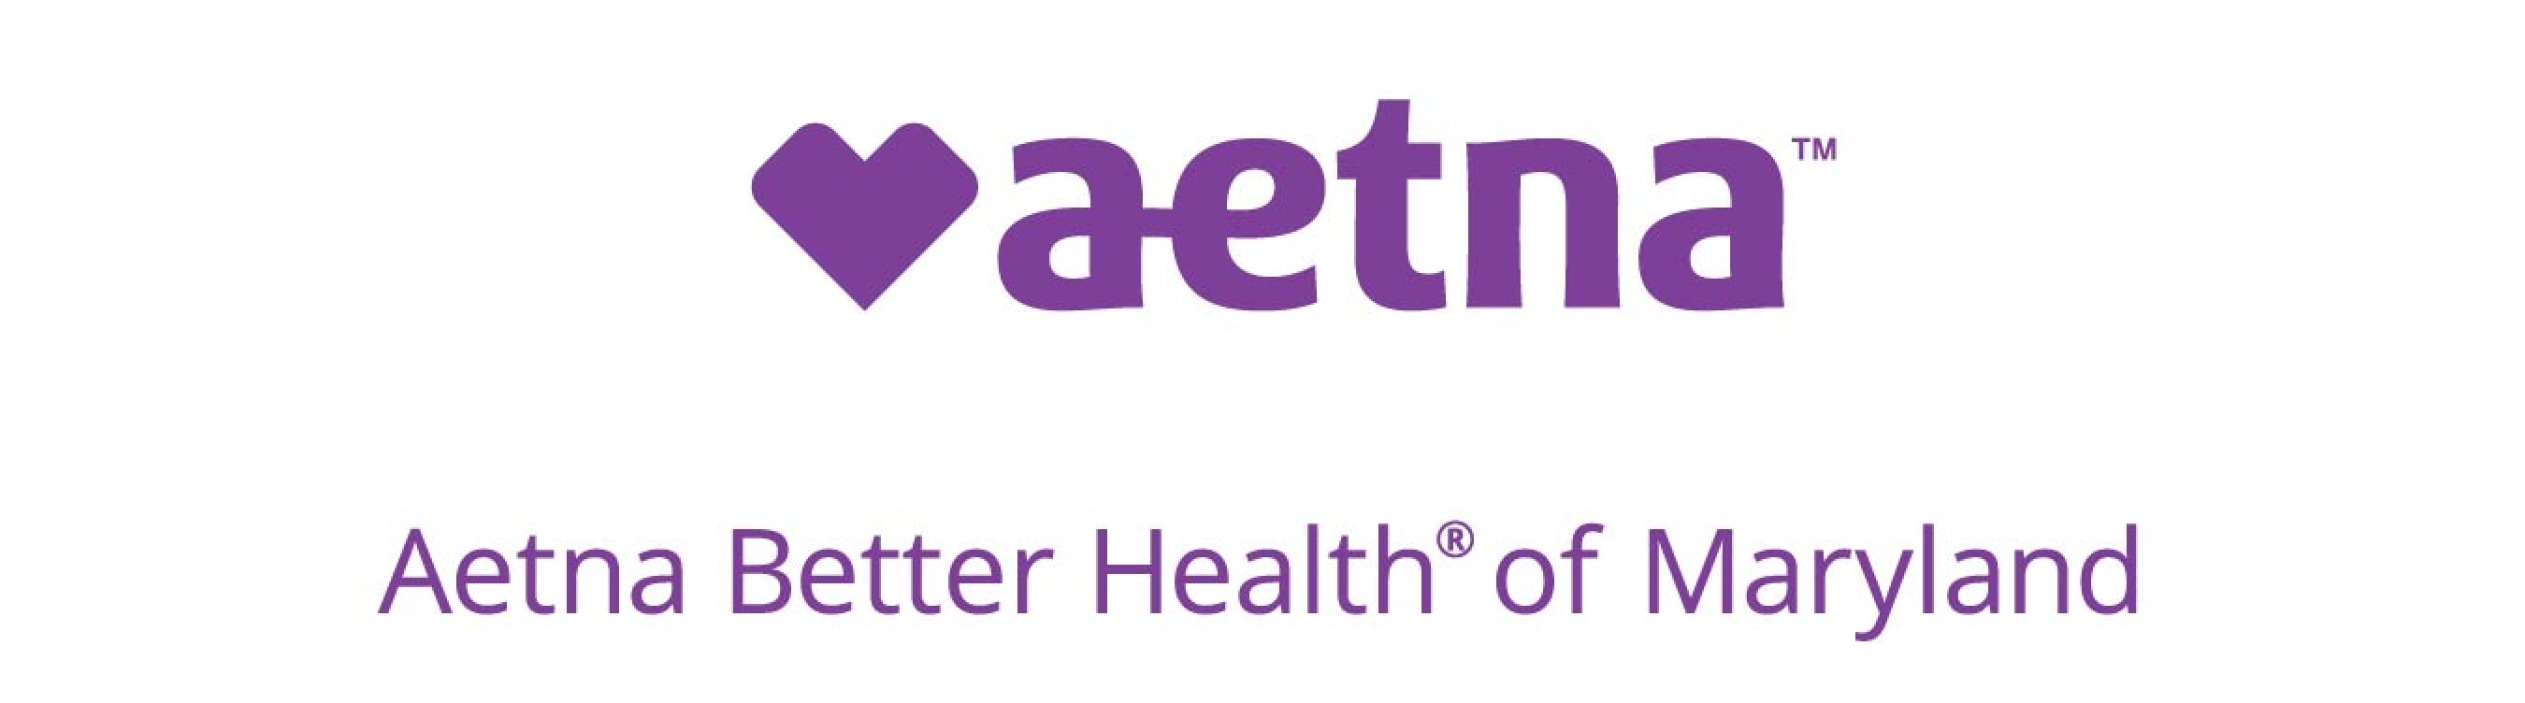 Find A Providerpharmacy Aetna Better Health Of Maryland